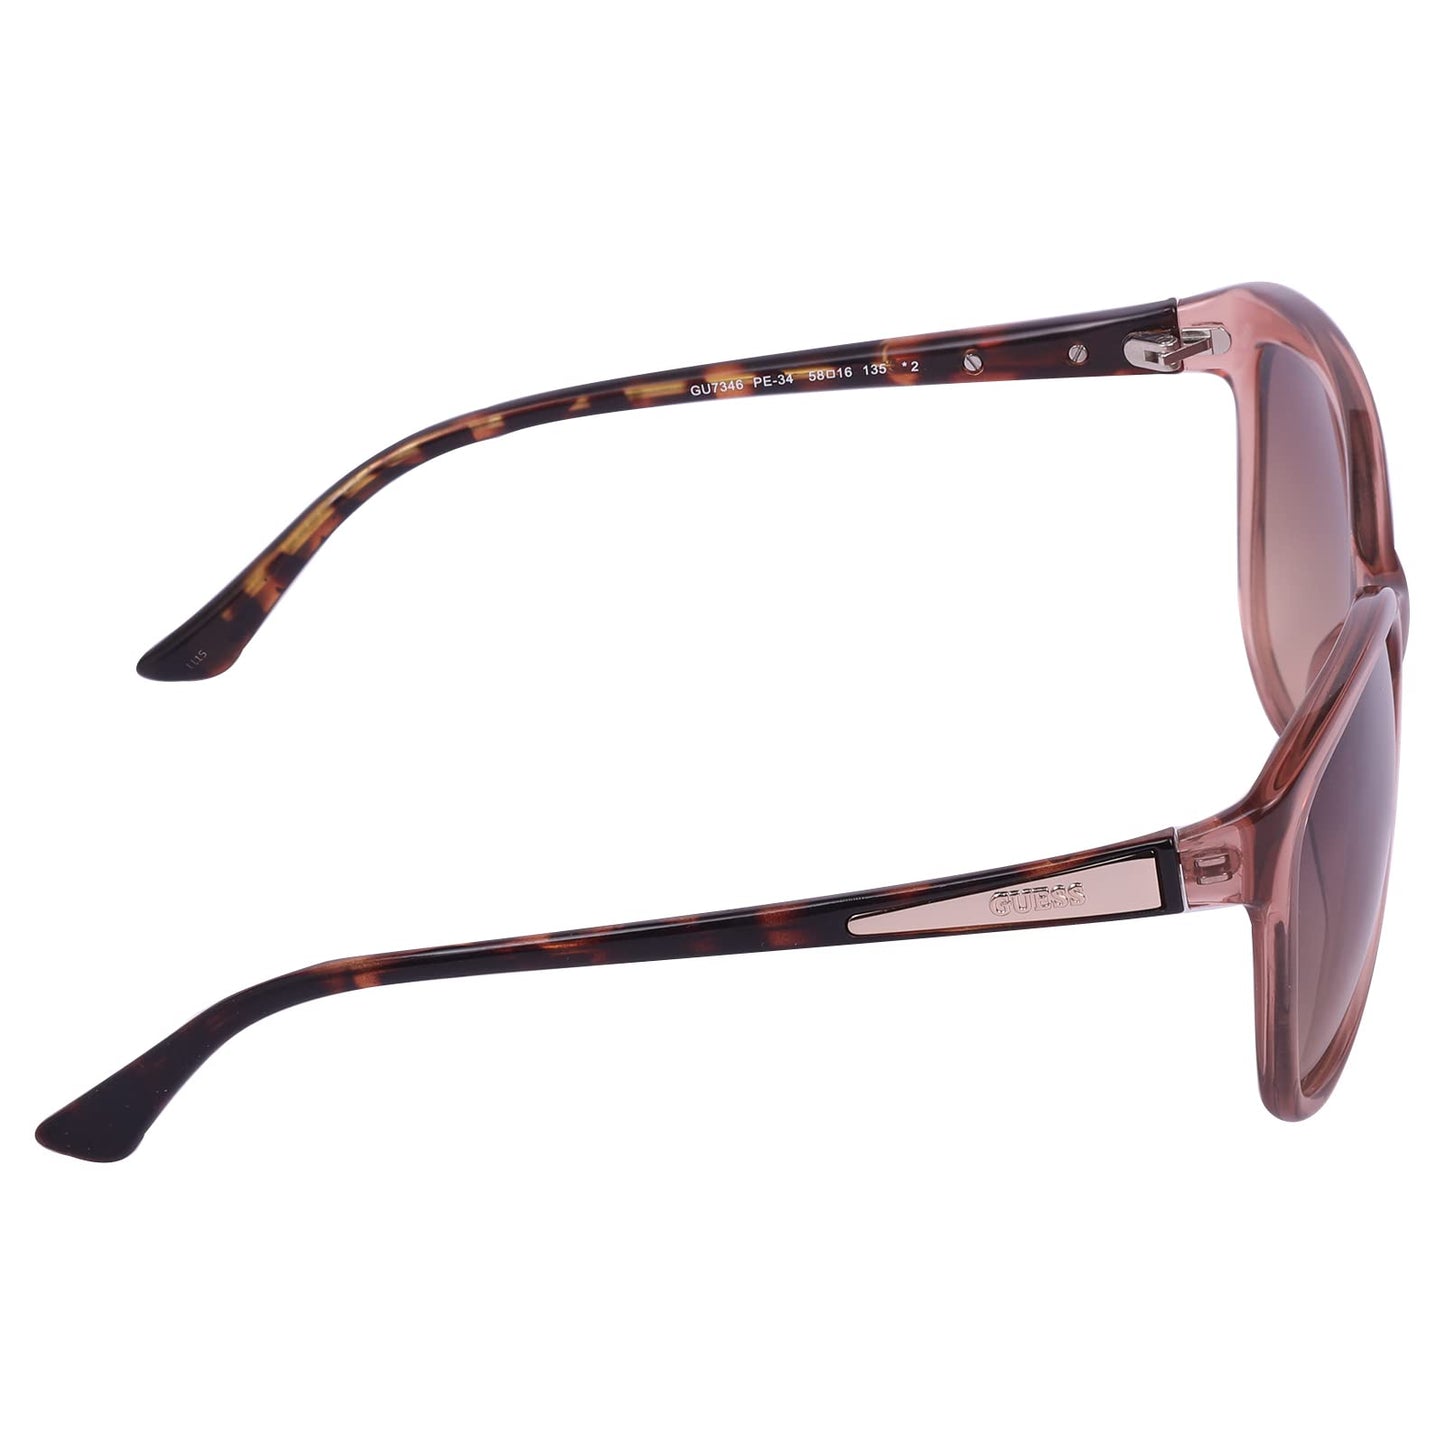 GUESS Gradient Butterfly Women's Sunglasses 7346 PE 34|58|Brown Color Lens - Pack of 1